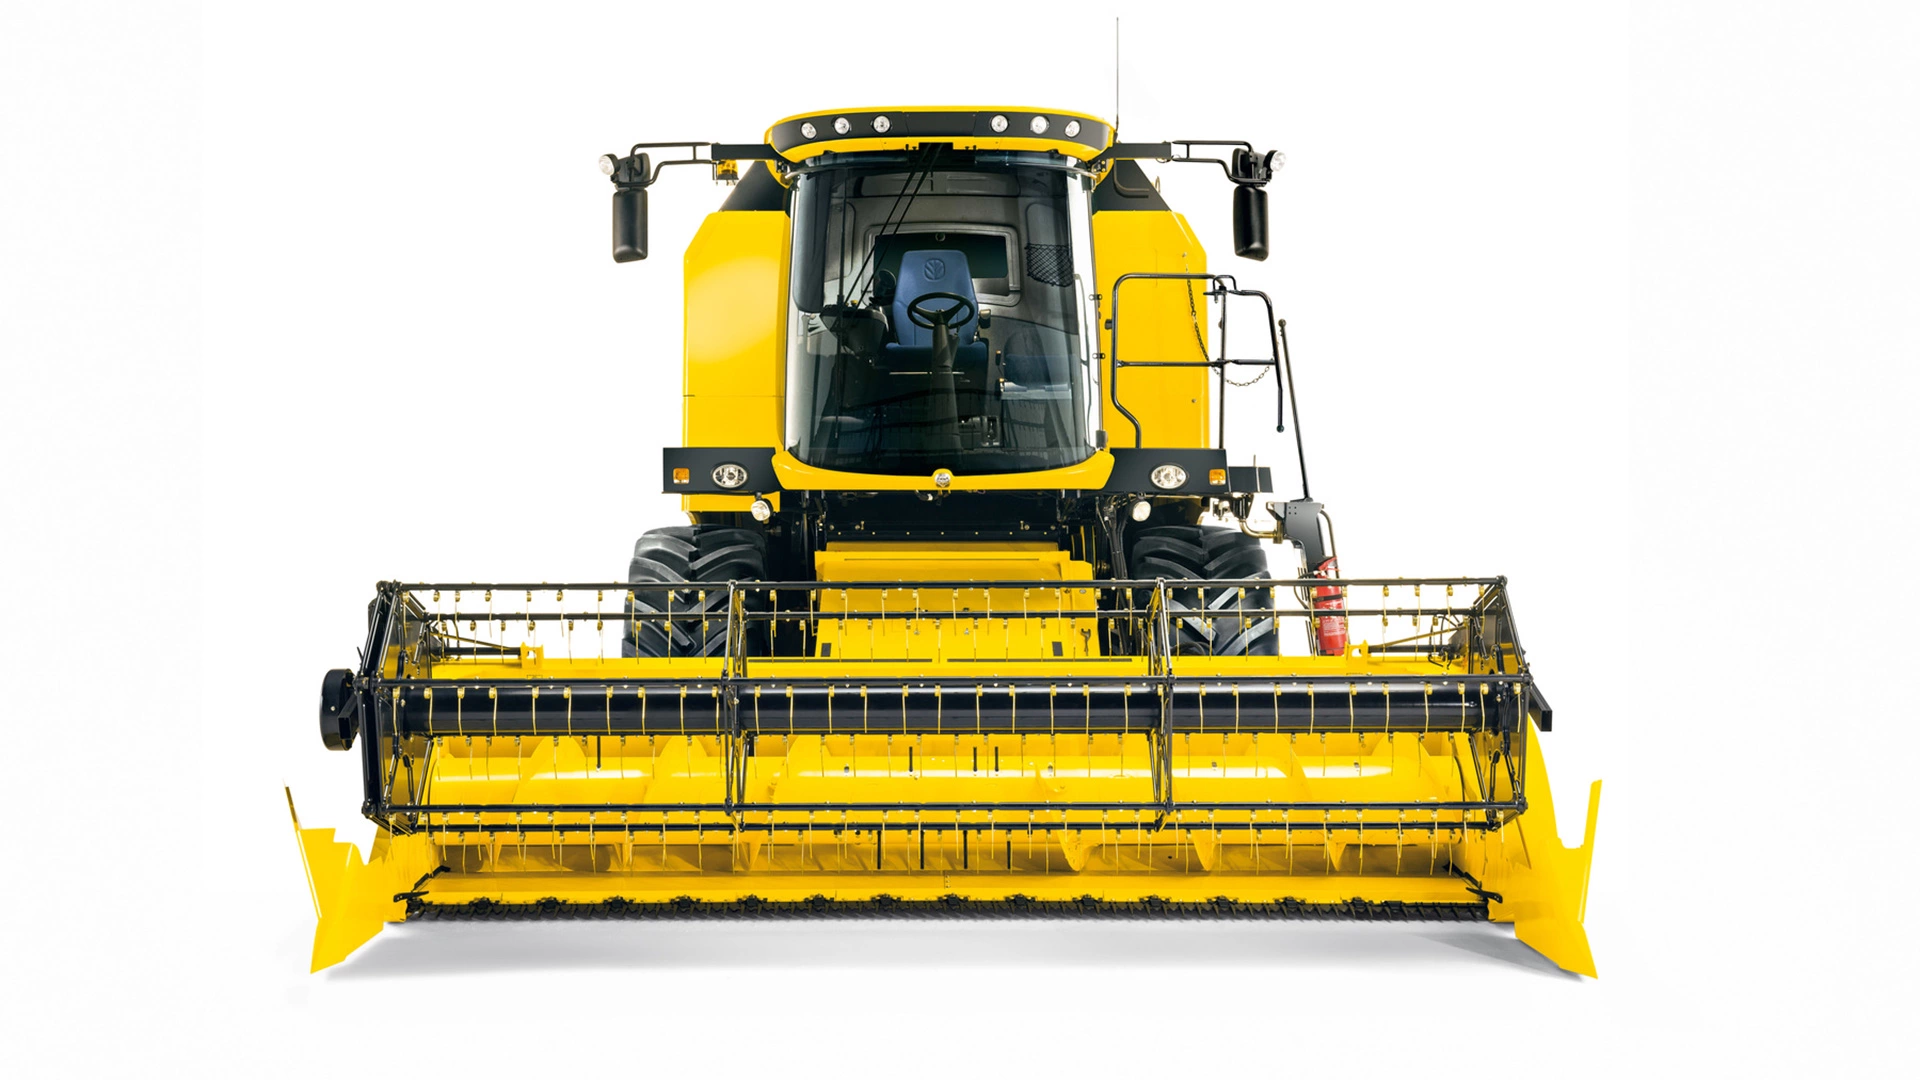 New Holland TC Combine Harvester, yellow, front view, modern design, efficient crop collection, white background.